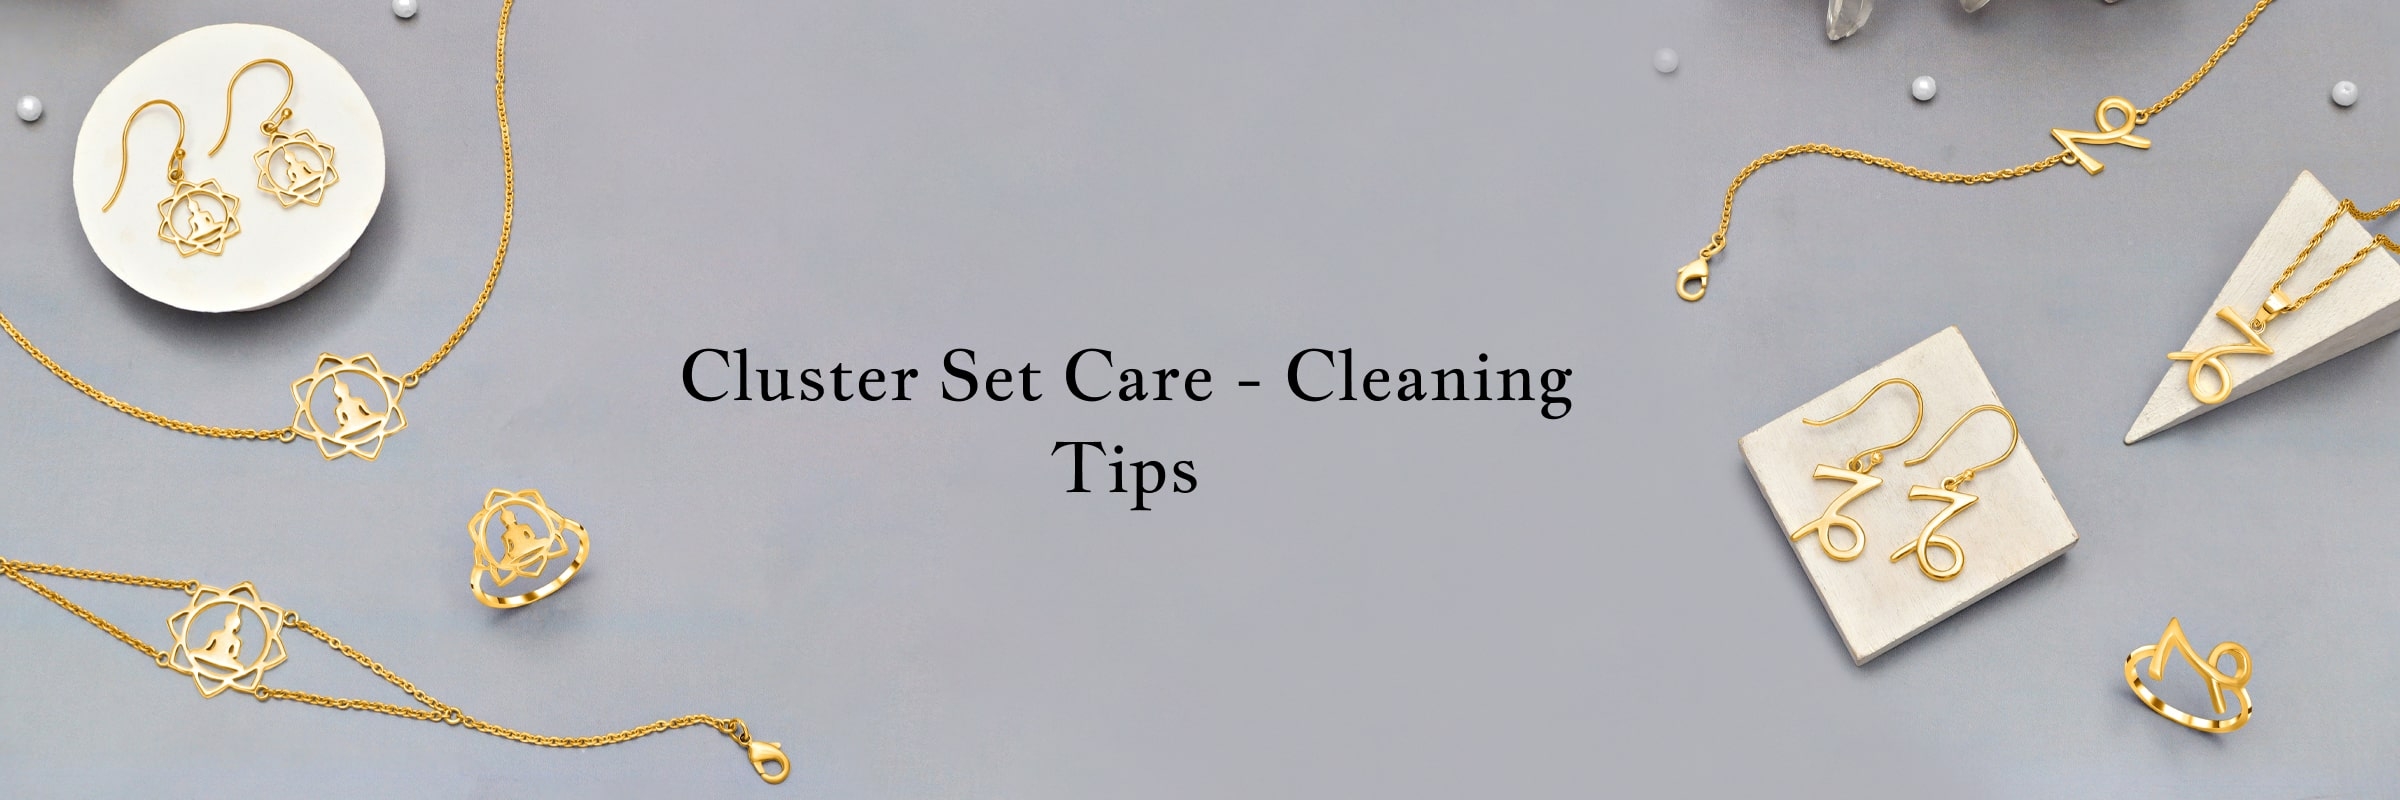 How to Clean and Take Care of Cluster Set Jewelry